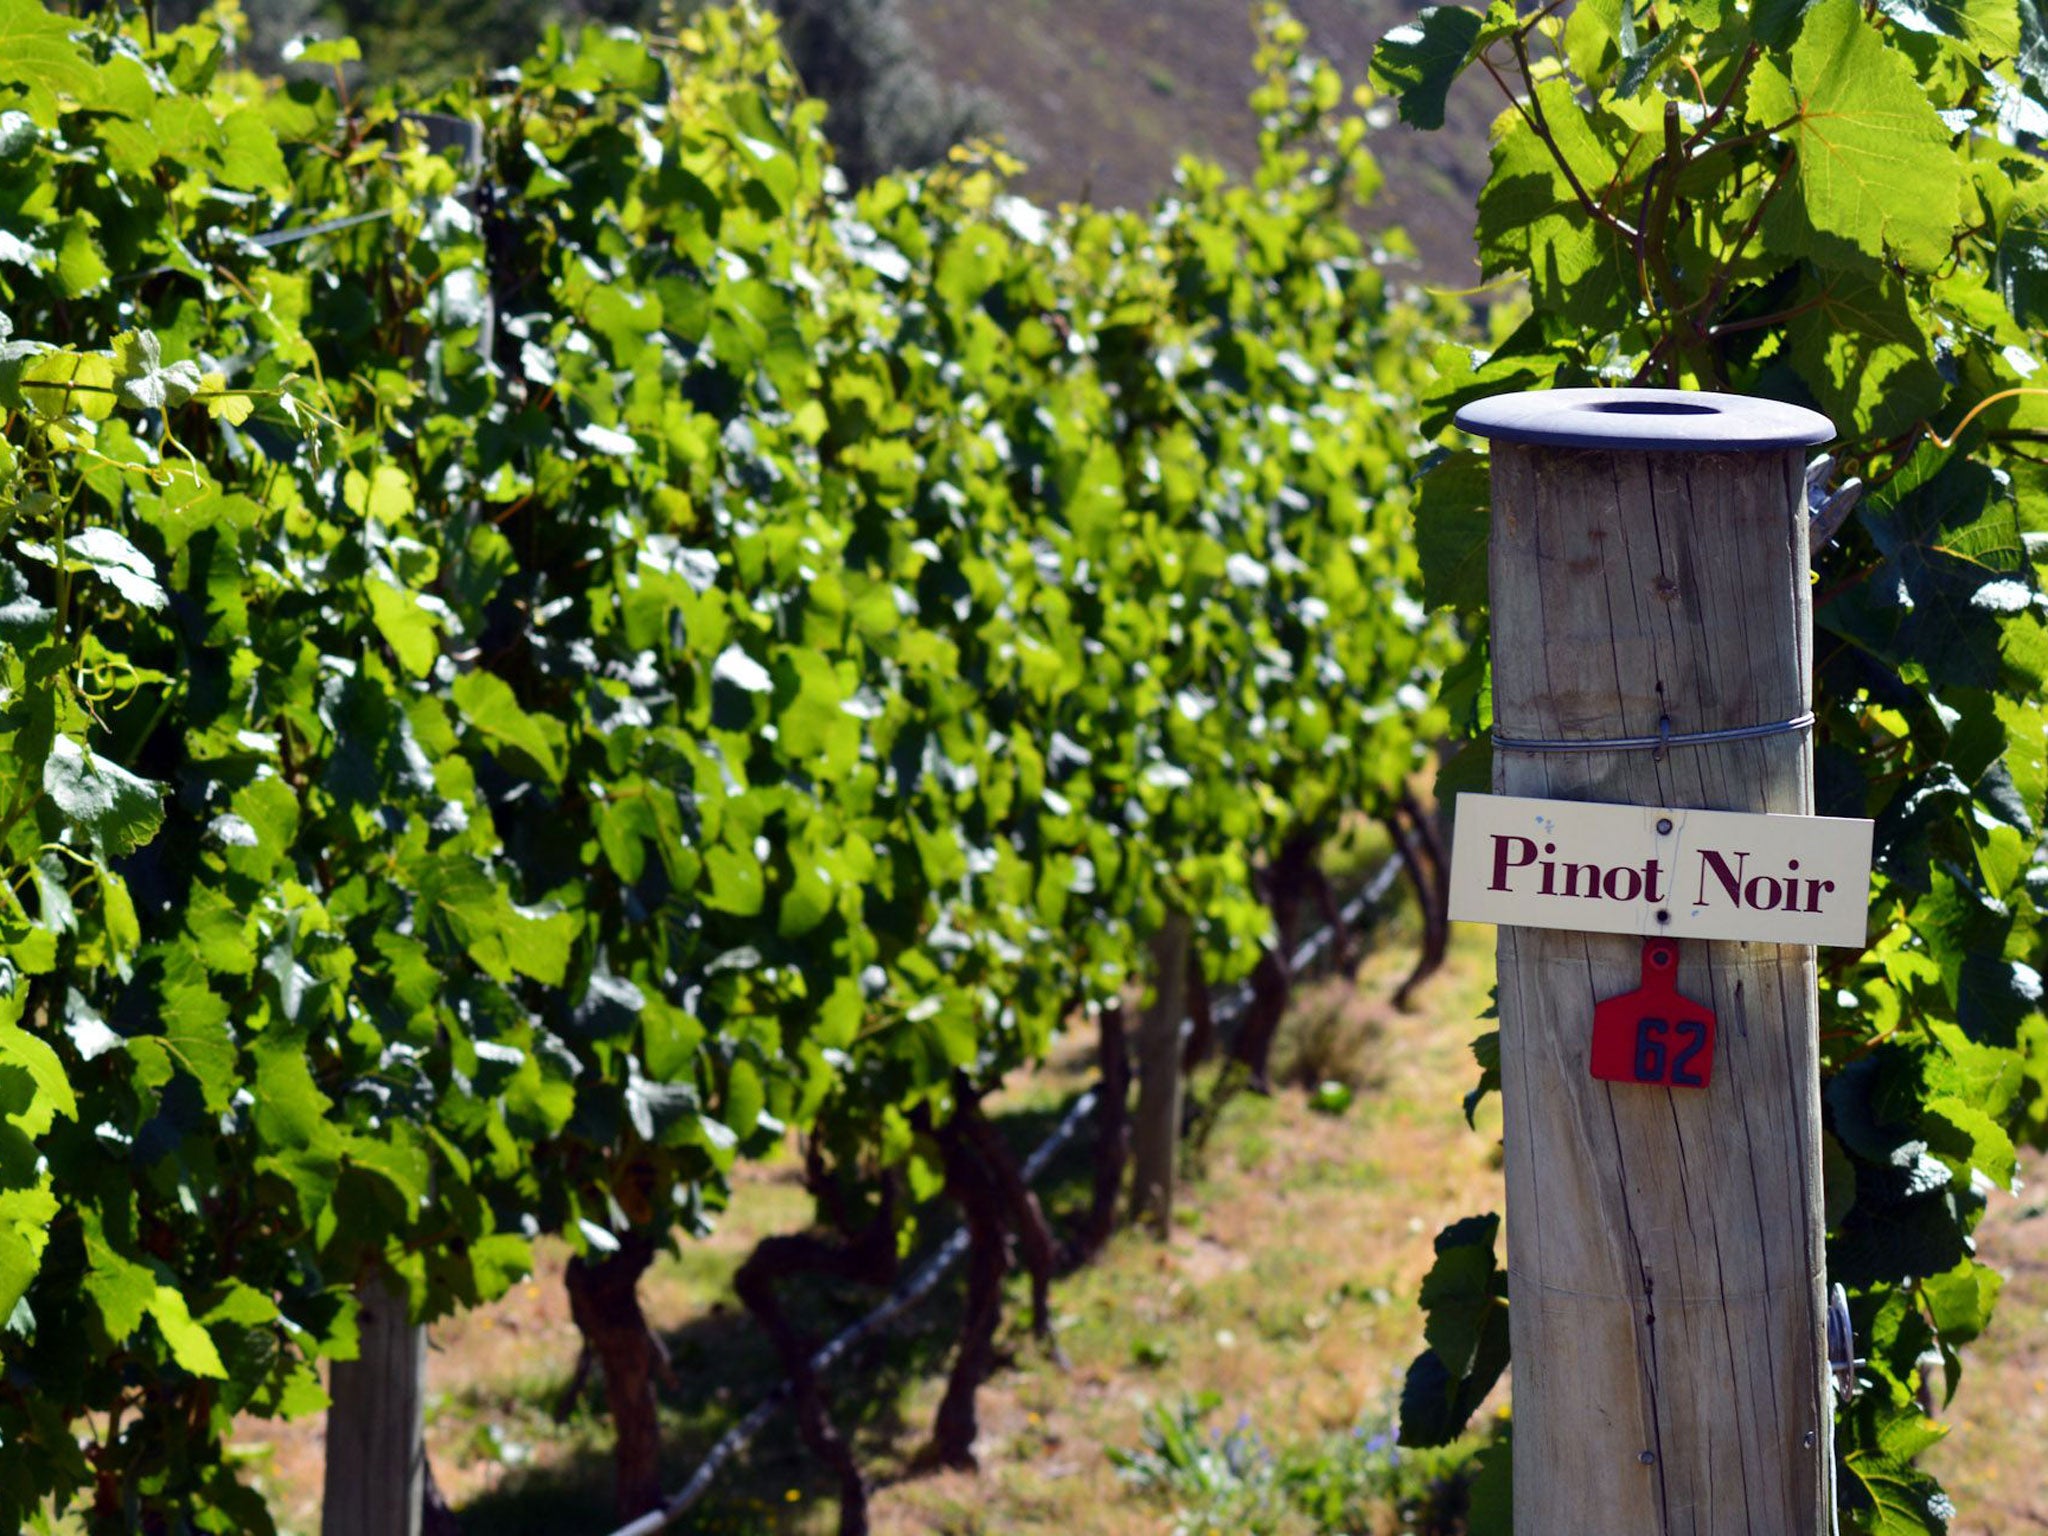 It was once thought that pinot noir in New Zealand was only good for sparkling wine